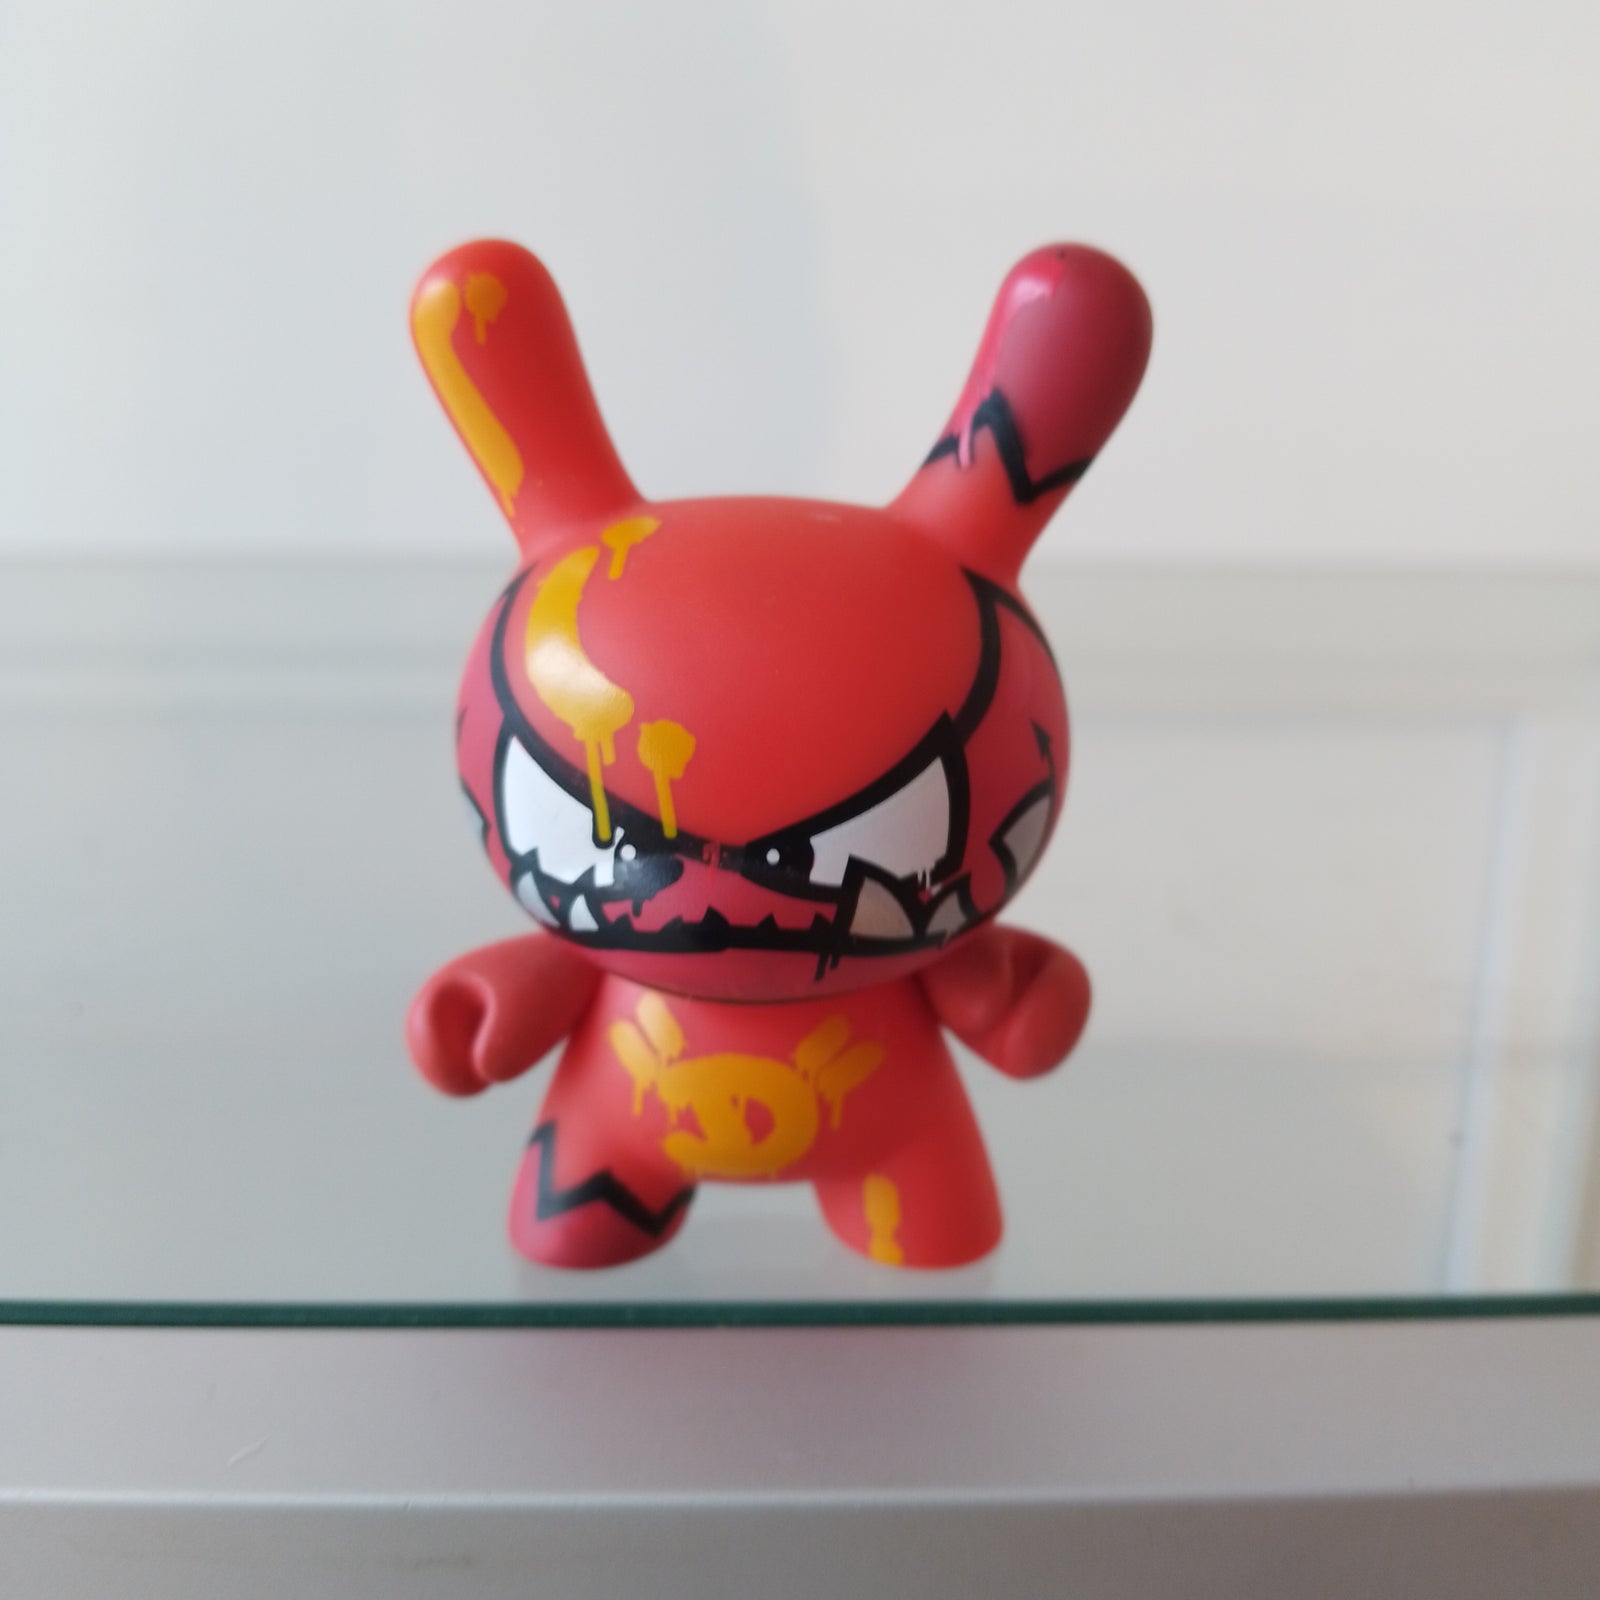 Mist Red Devil - Dunny Series 4 by Kidrobot